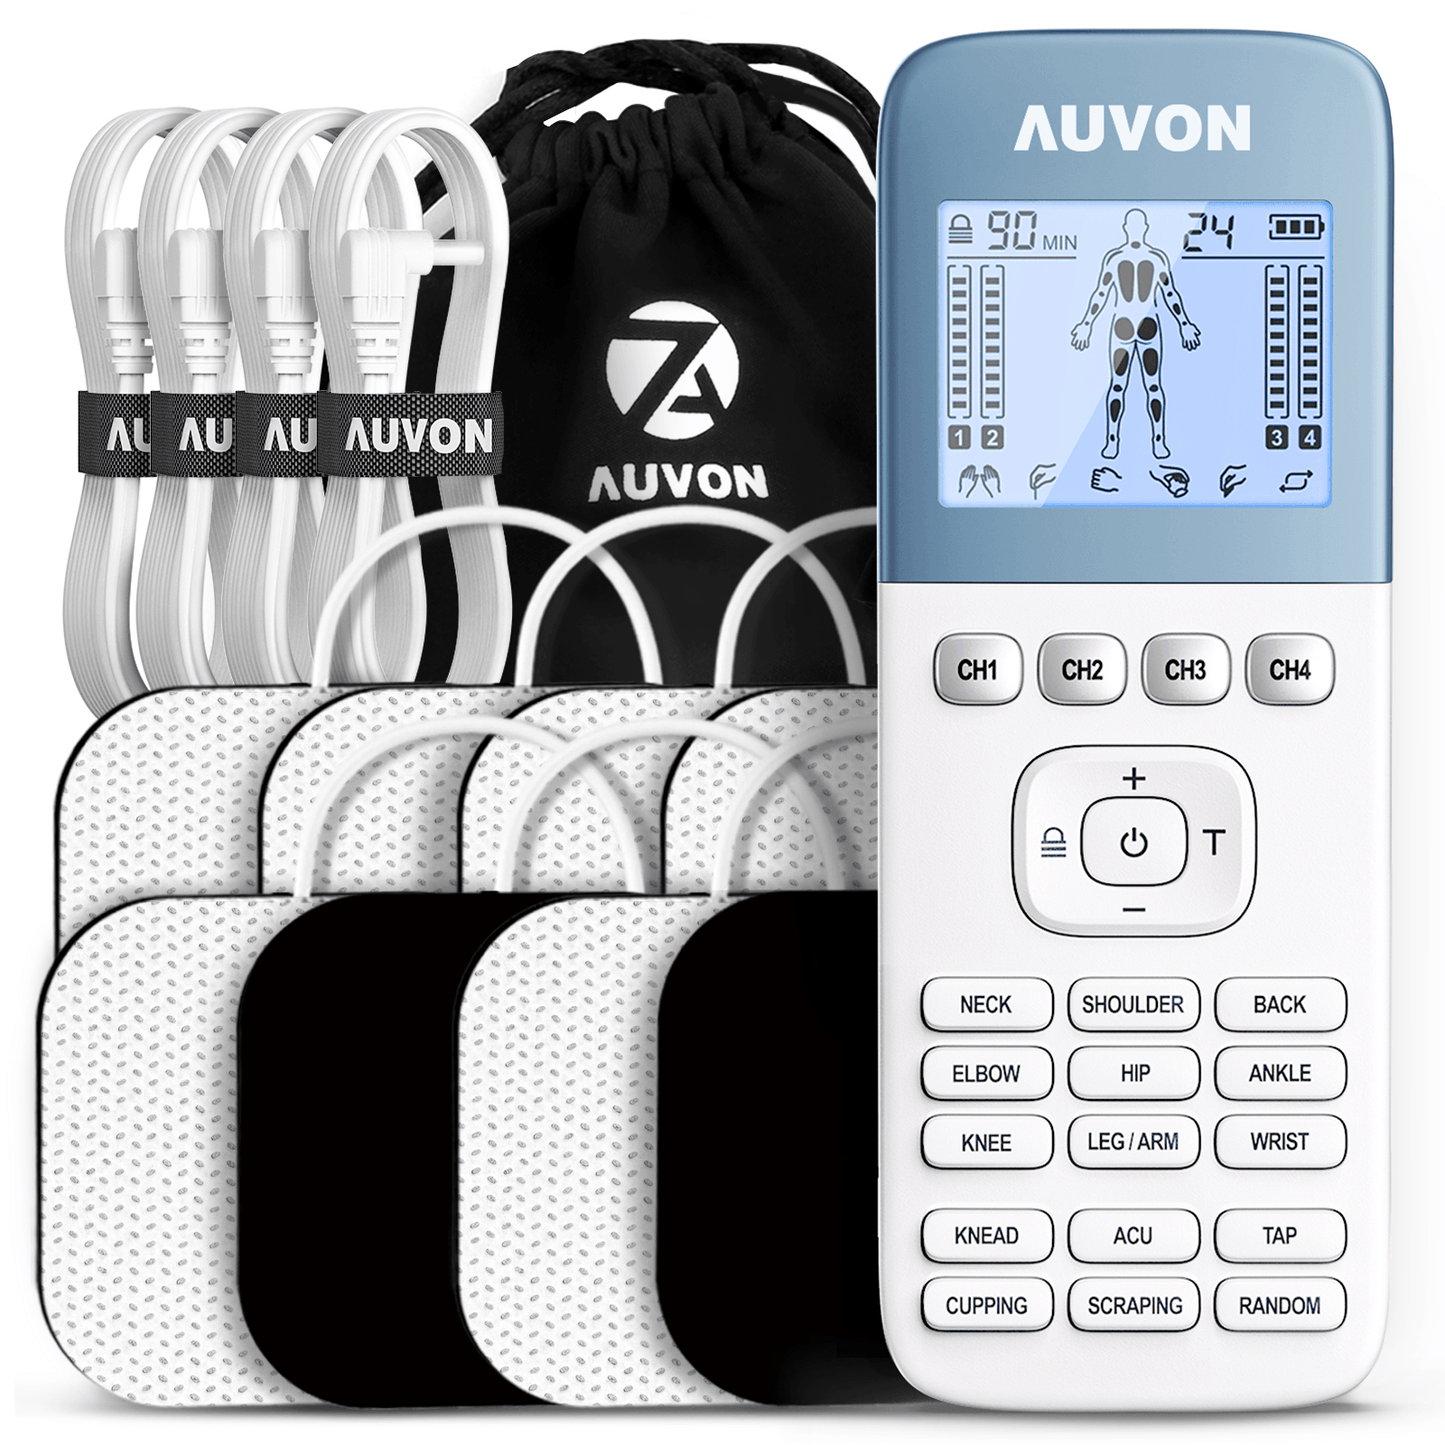 Digital 4-Channel EMS/TENS Unit portable/battery or AC Adapter Complete